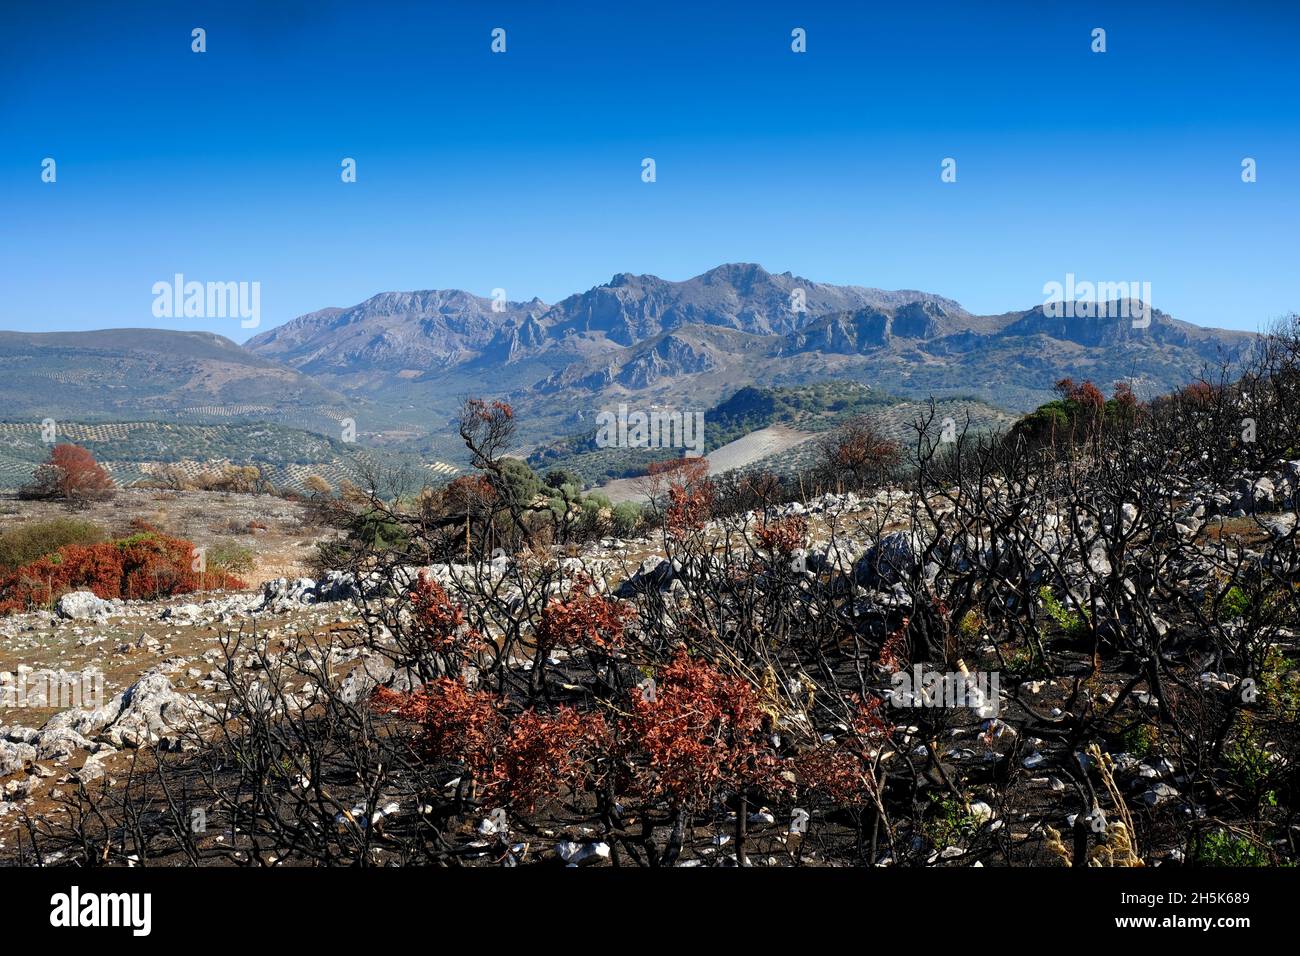 Landscape of burned and singed trees and plants after a summer wildfire in the Algar region of the Sierras Subbeticas Natural Park, Andalucia, Spain Stock Photo